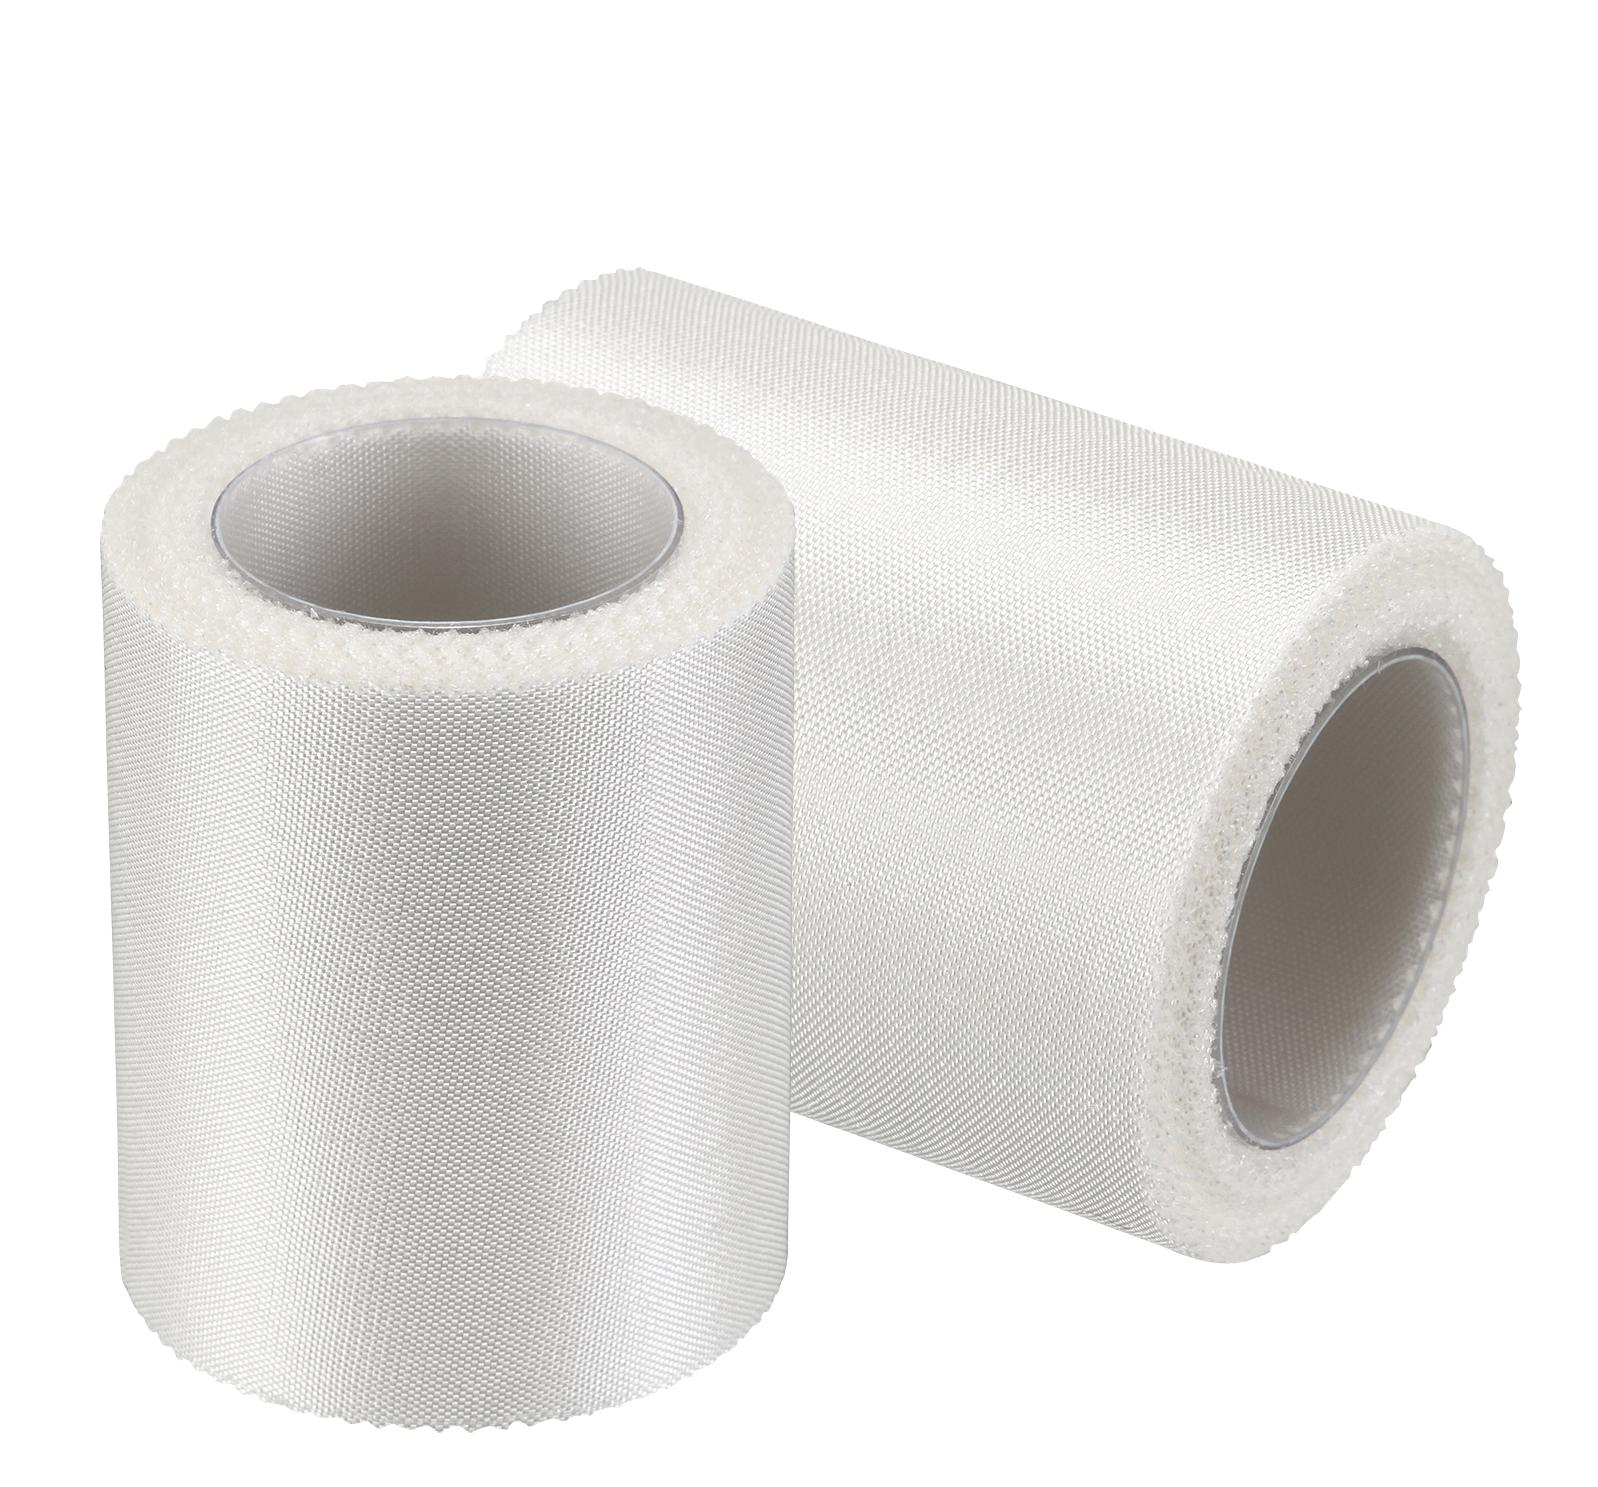 2-rolls-silk-medical-surgical-adhesive-tape